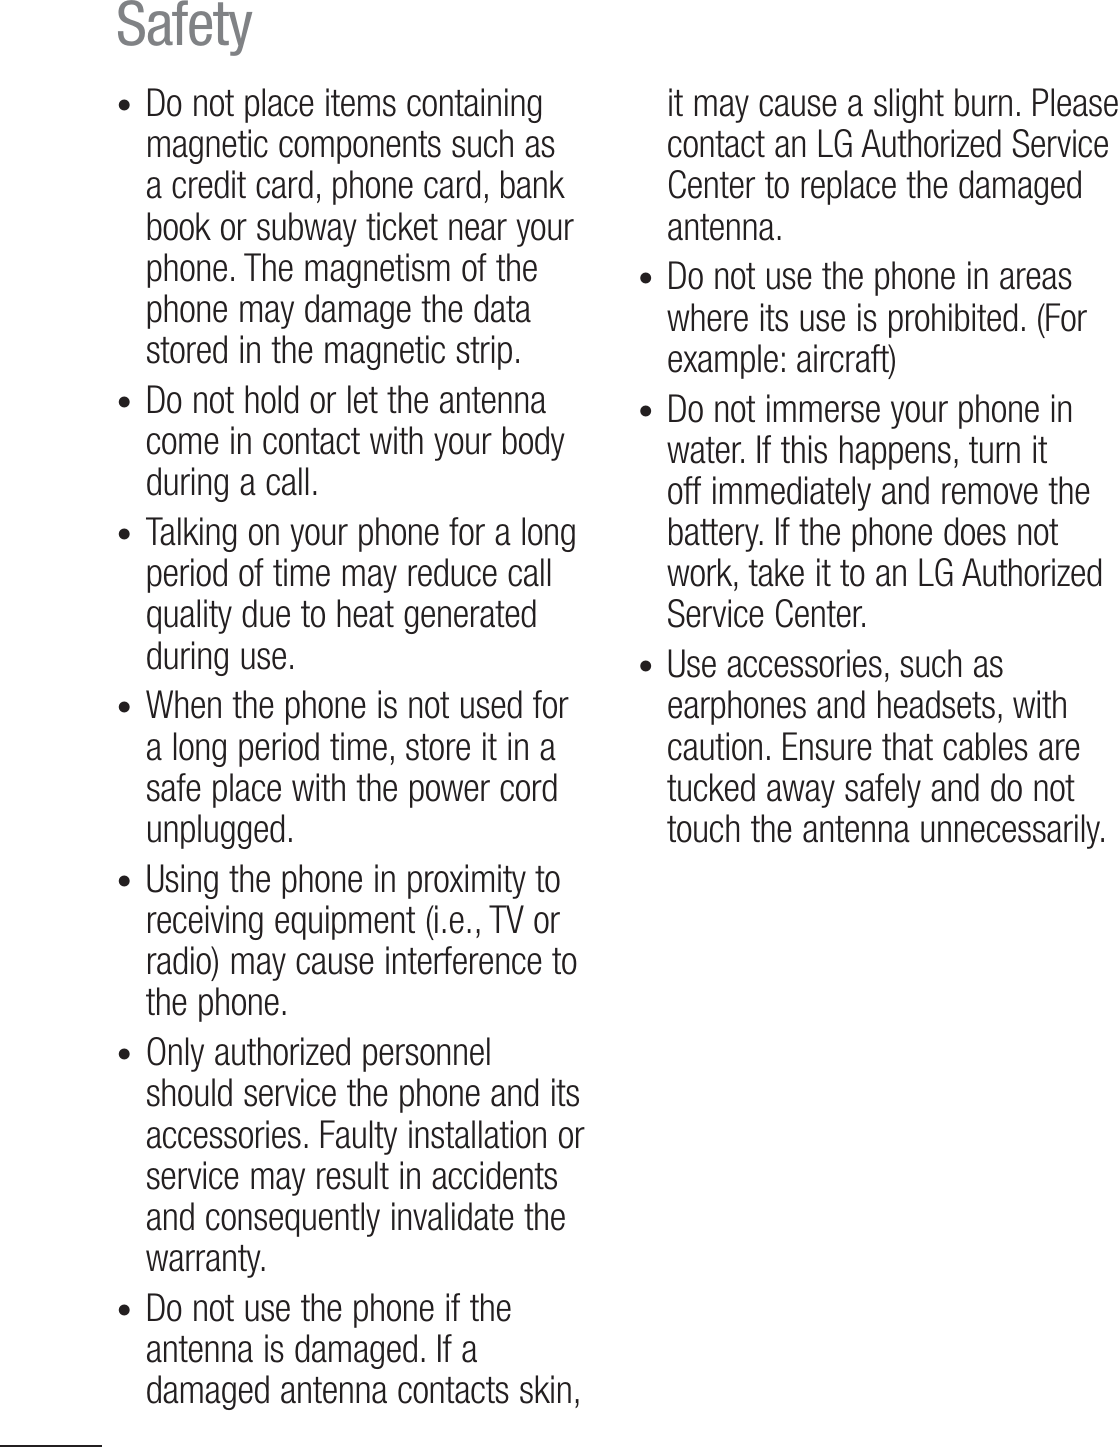 10Safetyt Do not place items containing magnetic components such as a credit card, phone card, bank book or subway ticket near your phone. The magnetism of the phone may damage the data stored in the magnetic strip.t  Do not hold or let the antenna come in contact with your body during a call.t Talking on your phone for a long period of time may reduce call quality due to heat generated during use.t When the phone is not used for a long period time, store it in a safe place with the power cord unplugged.t Using the phone in proximity to receiving equipment (i.e., TV or radio) may cause interference to the phone.t Only authorized personnel should service the phone and its accessories. Faulty installation or service may result in accidents and consequently invalidate the warranty.t Do not use the phone if the antenna is damaged. If a damaged antenna contacts skin, it may cause a slight burn. Please contact an LG Authorized Service Center to replace the damaged antenna.t Do not use the phone in areas where its use is prohibited. (For example: aircraft)t Do not immerse your phone in water. If this happens, turn it off immediately and remove the battery. If the phone does not work, take it to an LG Authorized Service Center.t  Use accessories, such as earphones and headsets, with caution. Ensure that cables are tucked away safely and do not touch the antenna unnecessarily.